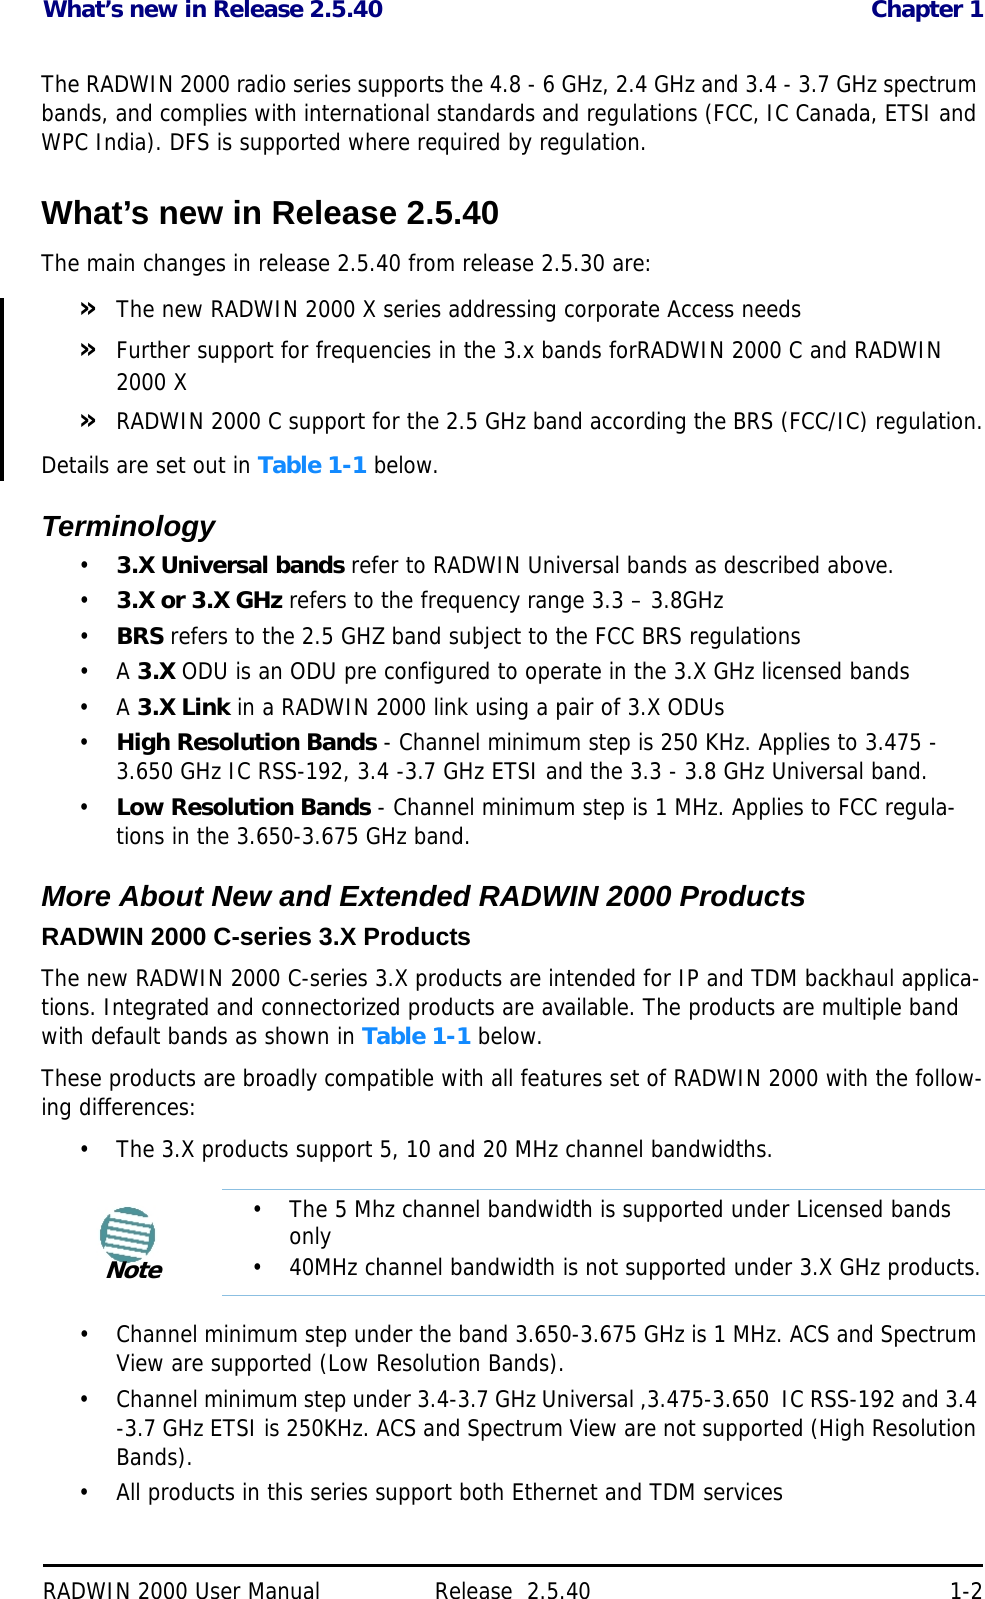 What’s new in Release 2.5.40 Chapter 1RADWIN 2000 User Manual Release  2.5.40 1-2The RADWIN 2000 radio series supports the 4.8 - 6 GHz, 2.4 GHz and 3.4 - 3.7 GHz spectrum bands, and complies with international standards and regulations (FCC, IC Canada, ETSI and WPC India). DFS is supported where required by regulation.What’s new in Release 2.5.40The main changes in release 2.5.40 from release 2.5.30 are:»The new RADWIN 2000 X series addressing corporate Access needs»Further support for frequencies in the 3.x bands forRADWIN 2000 C and RADWIN 2000 X»RADWIN 2000 C support for the 2.5 GHz band according the BRS (FCC/IC) regulation.Details are set out in Table 1-1 below.Terminology•3.X Universal bands refer to RADWIN Universal bands as described above.•3.X or 3.X GHz refers to the frequency range 3.3 – 3.8GHz•BRS refers to the 2.5 GHZ band subject to the FCC BRS regulations •A 3.X ODU is an ODU pre configured to operate in the 3.X GHz licensed bands•A 3.X Link in a RADWIN 2000 link using a pair of 3.X ODUs•High Resolution Bands - Channel minimum step is 250 KHz. Applies to 3.475 - 3.650 GHz IC RSS-192, 3.4 -3.7 GHz ETSI and the 3.3 - 3.8 GHz Universal band.•Low Resolution Bands - Channel minimum step is 1 MHz. Applies to FCC regula-tions in the 3.650-3.675 GHz band.More About New and Extended RADWIN 2000 ProductsRADWIN 2000 C-series 3.X ProductsThe new RADWIN 2000 C-series 3.X products are intended for IP and TDM backhaul applica-tions. Integrated and connectorized products are available. The products are multiple band with default bands as shown in Table 1-1 below.These products are broadly compatible with all features set of RADWIN 2000 with the follow-ing differences:• The 3.X products support 5, 10 and 20 MHz channel bandwidths.• Channel minimum step under the band 3.650-3.675 GHz is 1 MHz. ACS and Spectrum View are supported (Low Resolution Bands).• Channel minimum step under 3.4-3.7 GHz Universal ,3.475-3.650  IC RSS-192 and 3.4 -3.7 GHz ETSI is 250KHz. ACS and Spectrum View are not supported (High Resolution Bands).• All products in this series support both Ethernet and TDM servicesNote• The 5 Mhz channel bandwidth is supported under Licensed bands only• 40MHz channel bandwidth is not supported under 3.X GHz products.